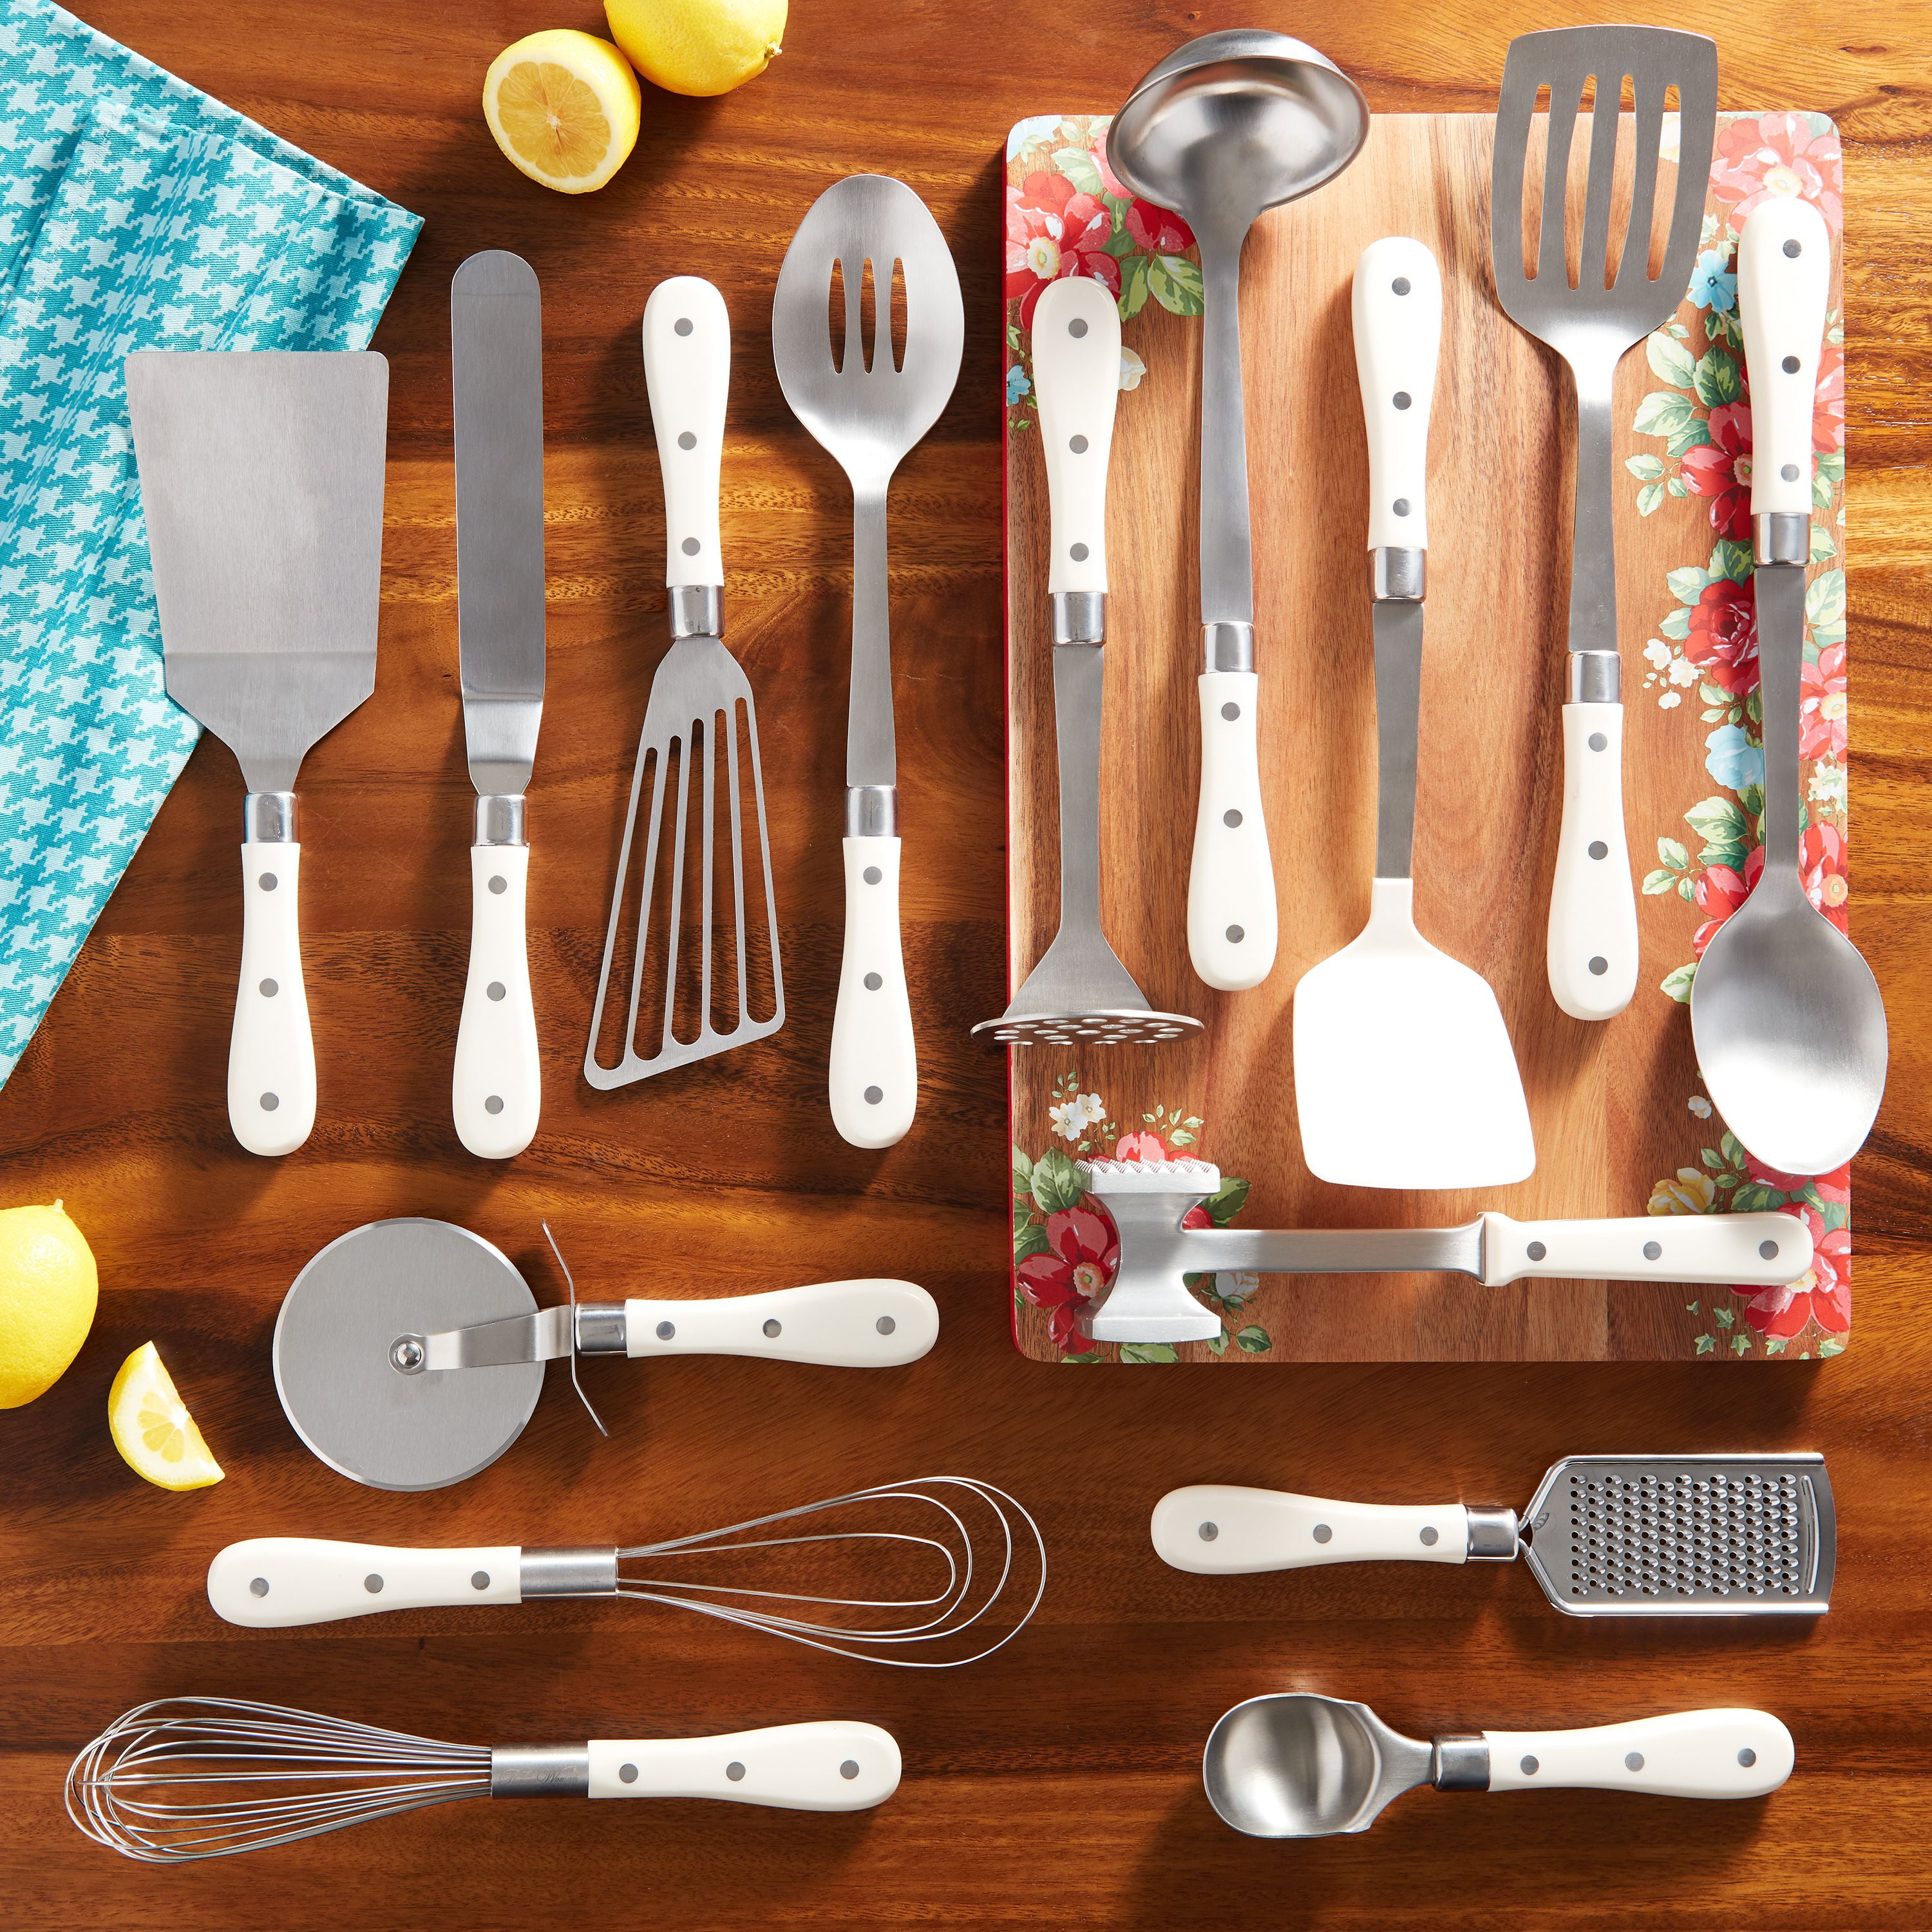 Pioneer Woman kitchen tools are on sale, starting at $19